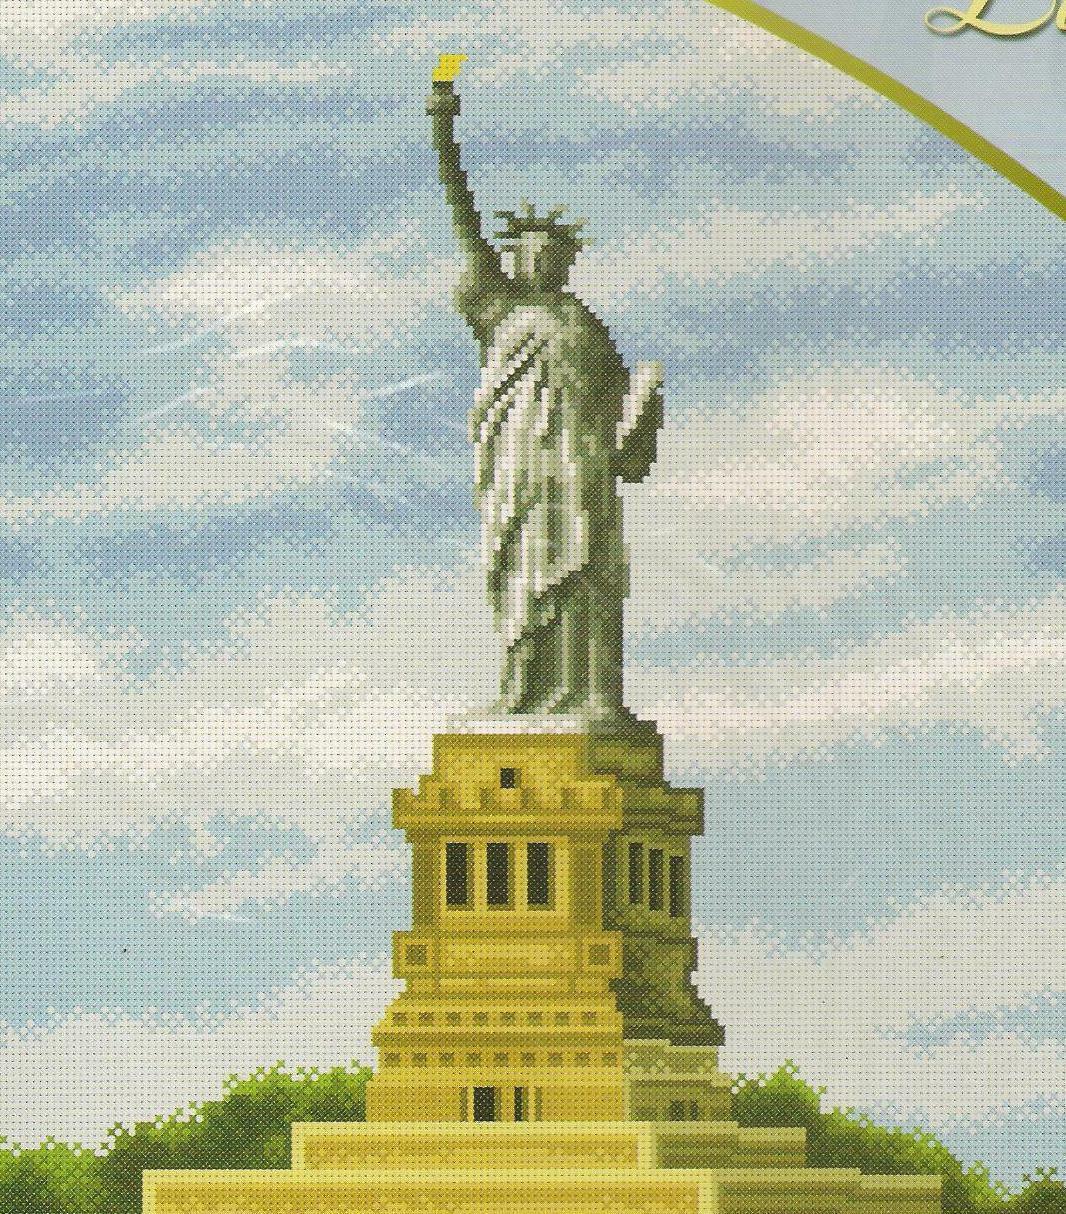 SALE!!! COMPLETE CROSS STITCH MATERIALS "LADY LIBERTY" FREE SHIP - $24.74